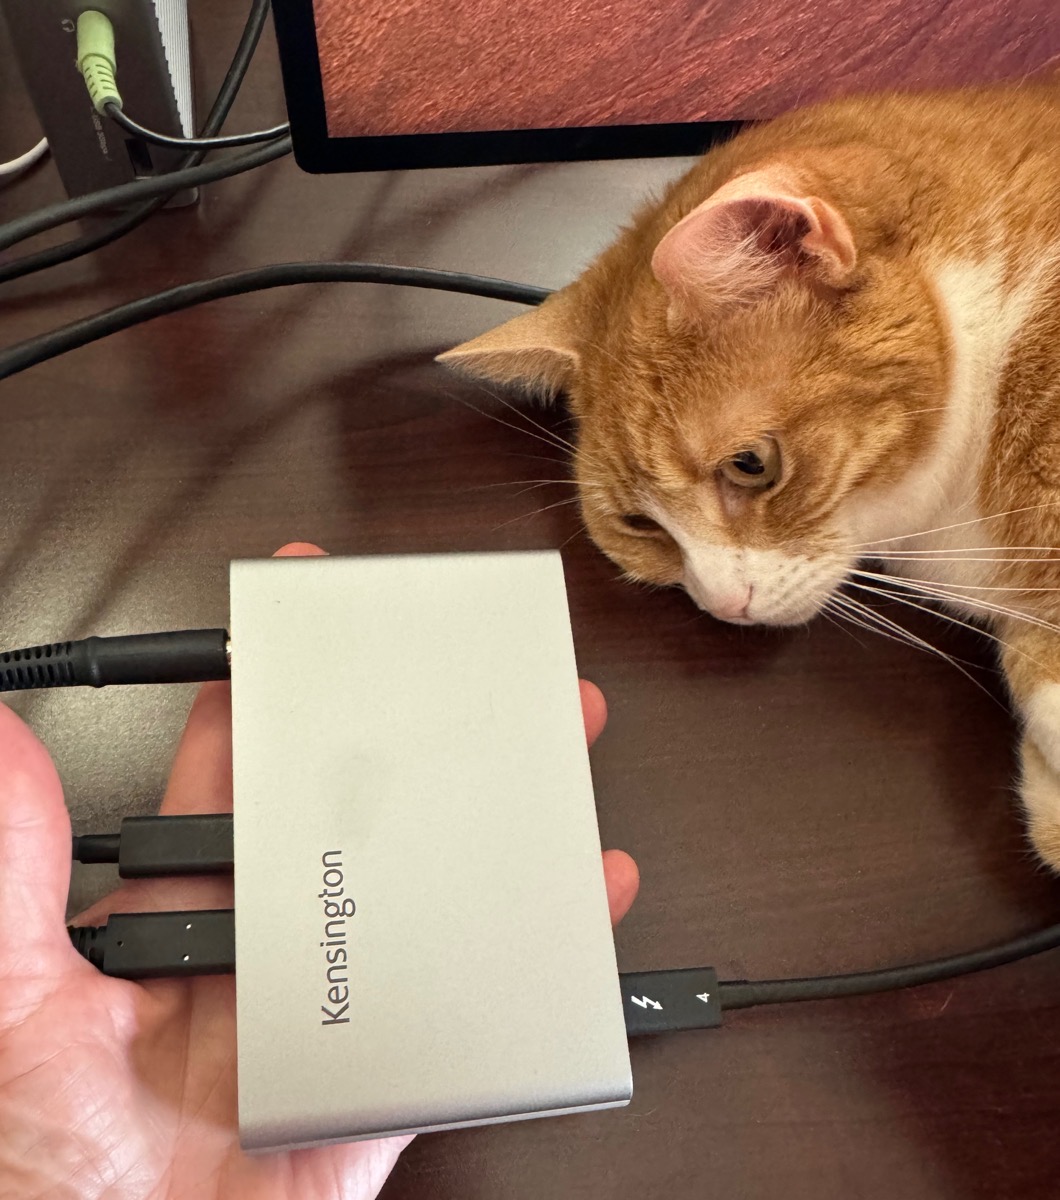 Kensington hub flat in my hand showing Thunderbolt cables coming out both sides and power. Also an orange cat laying on the table looking at the hub.